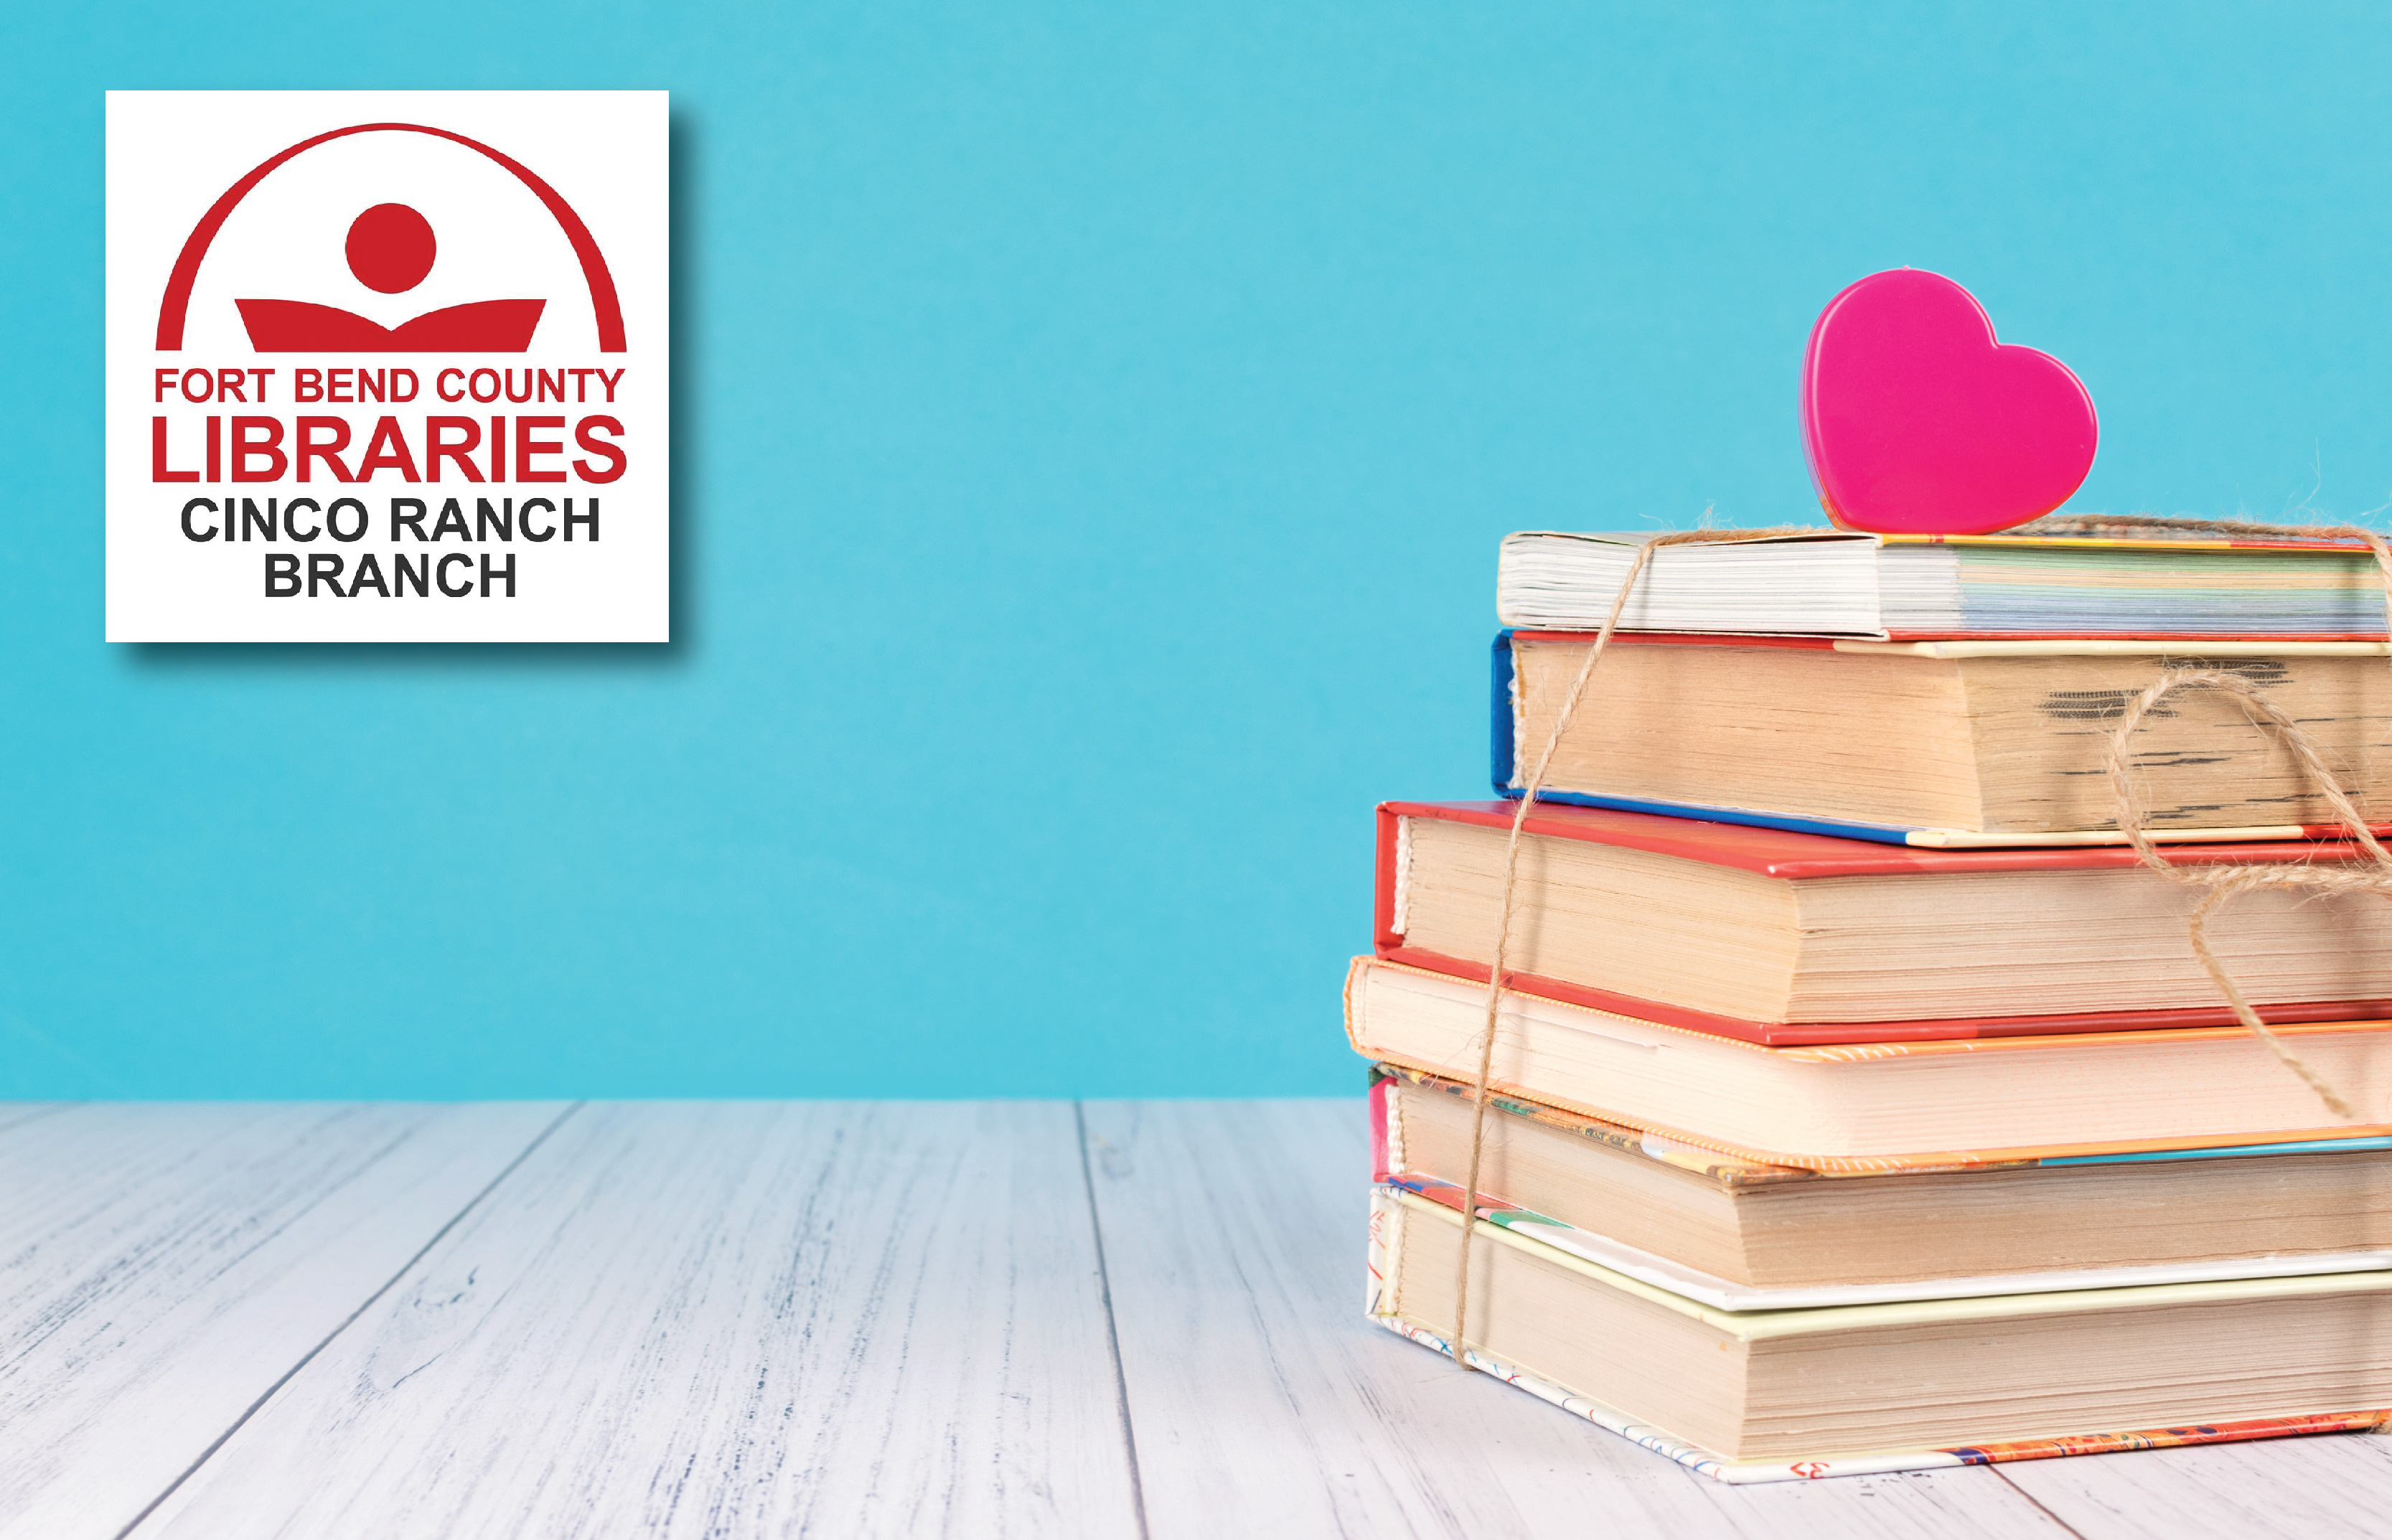 Book Lovers Unite: Donate Your Gently-Used Books for a Good Cause at Cinco Ranch Branch Library